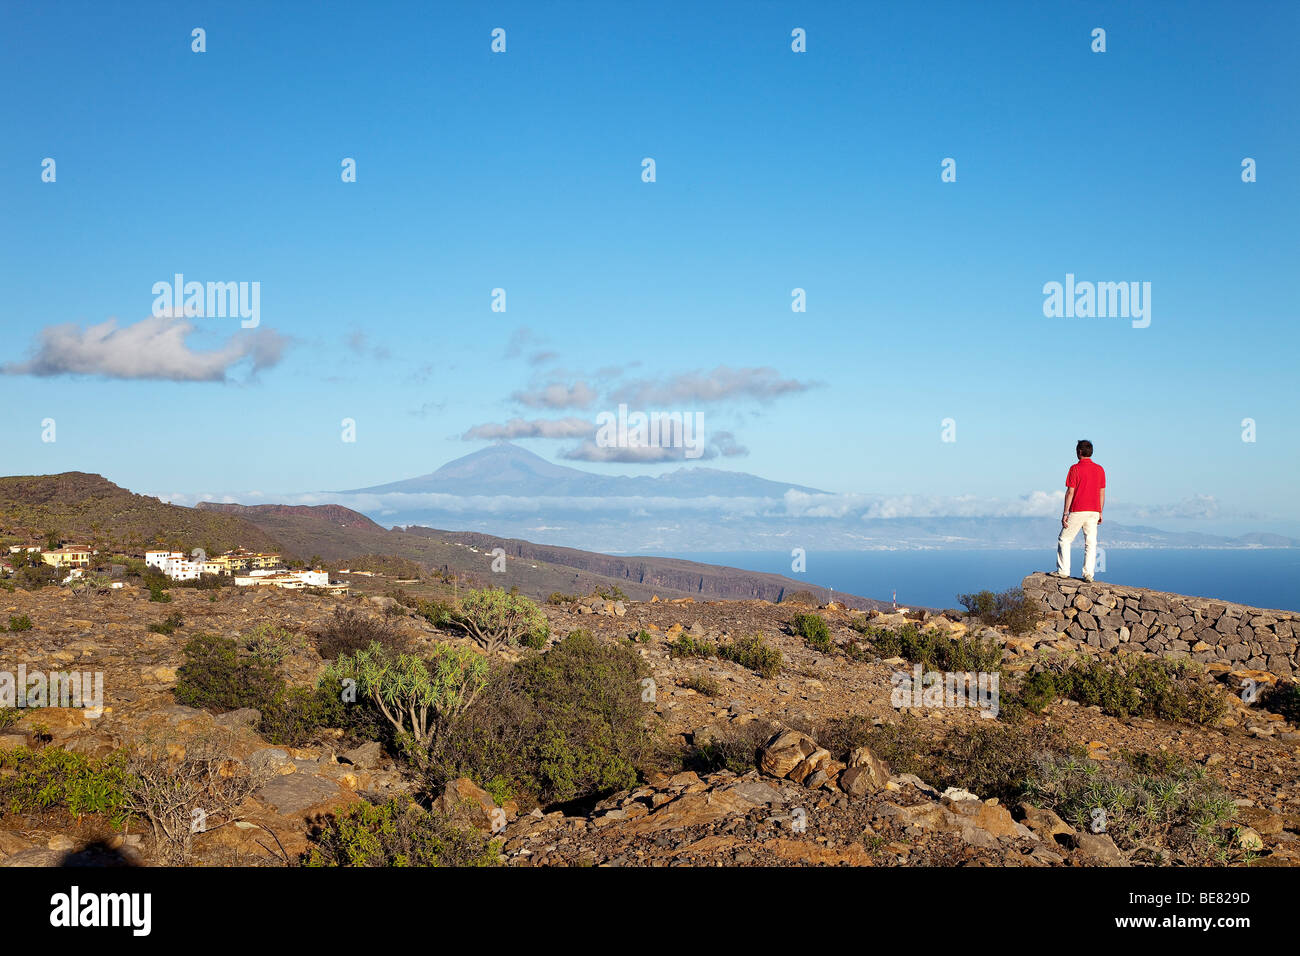 Hiker looking at view at Teide volcano and at the sea, La Gomera, Canary Islands, Spain, Europe Stock Photo